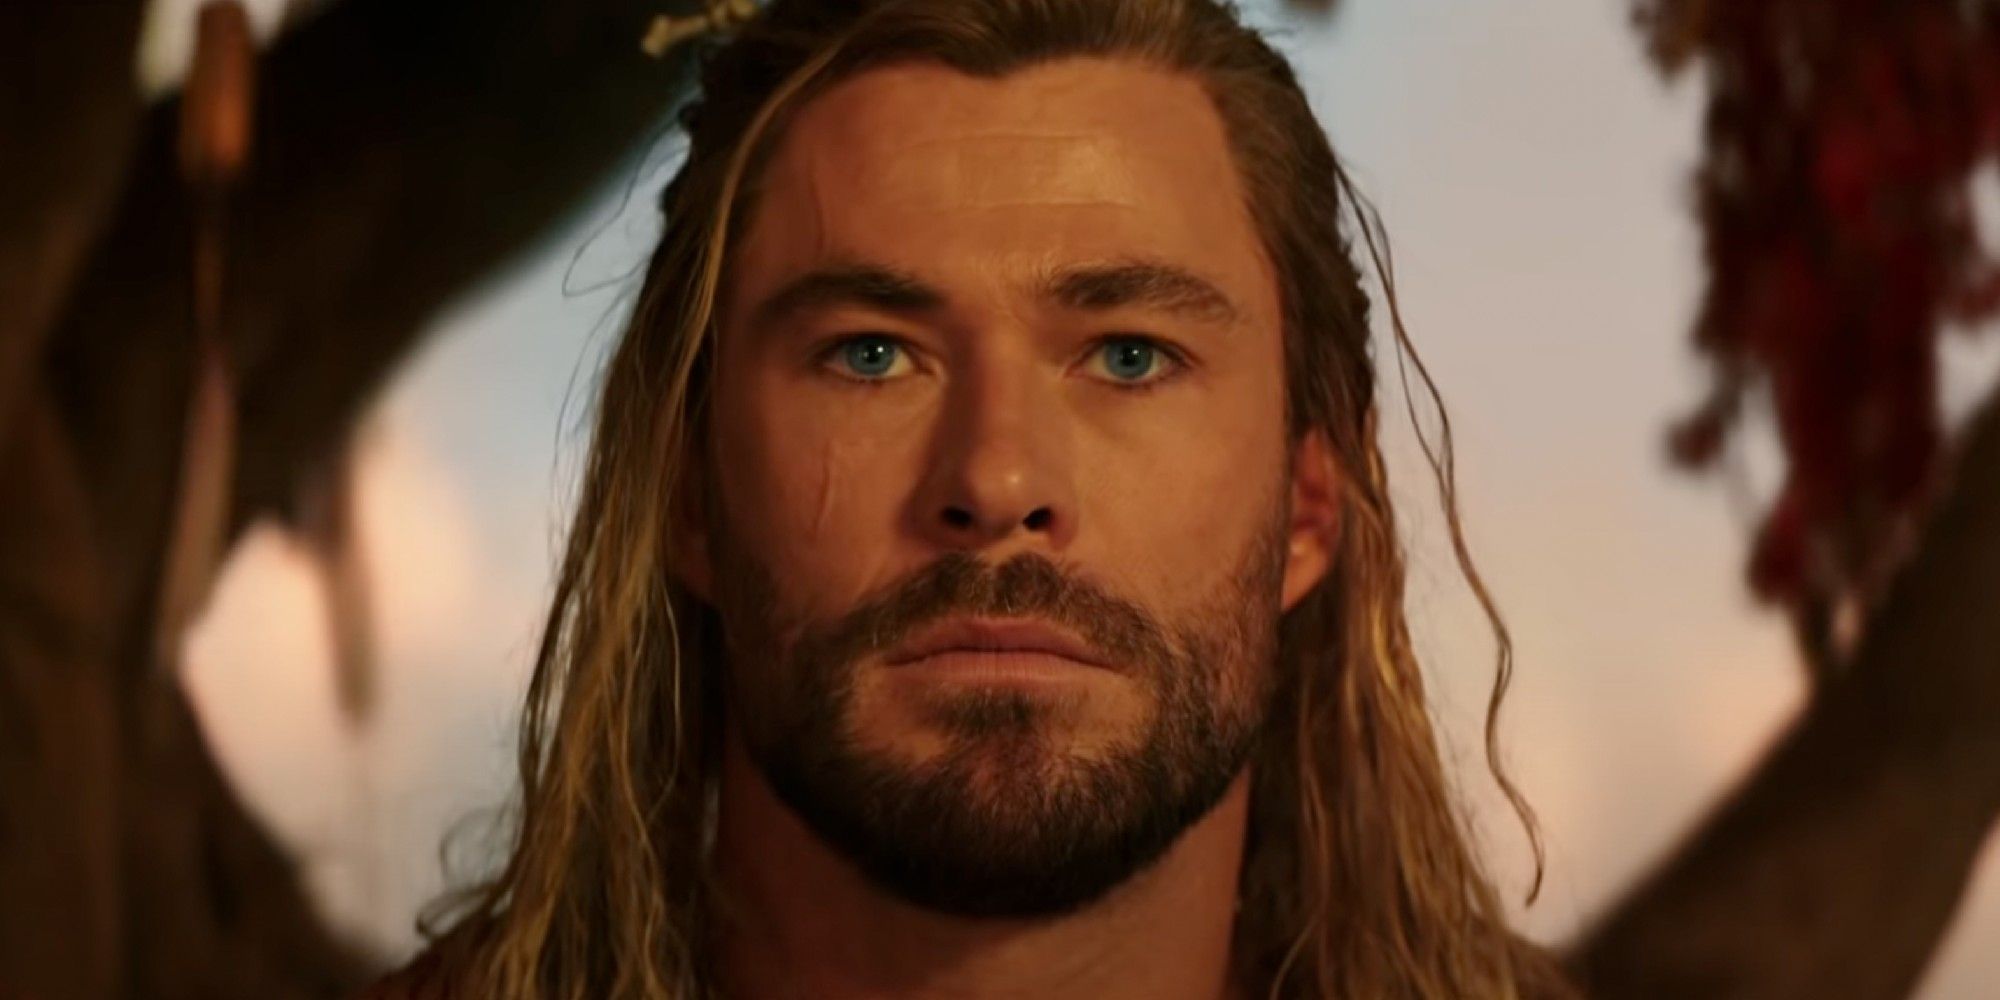 Chris Hemsworth As Thor In Love and Thunder Trailer